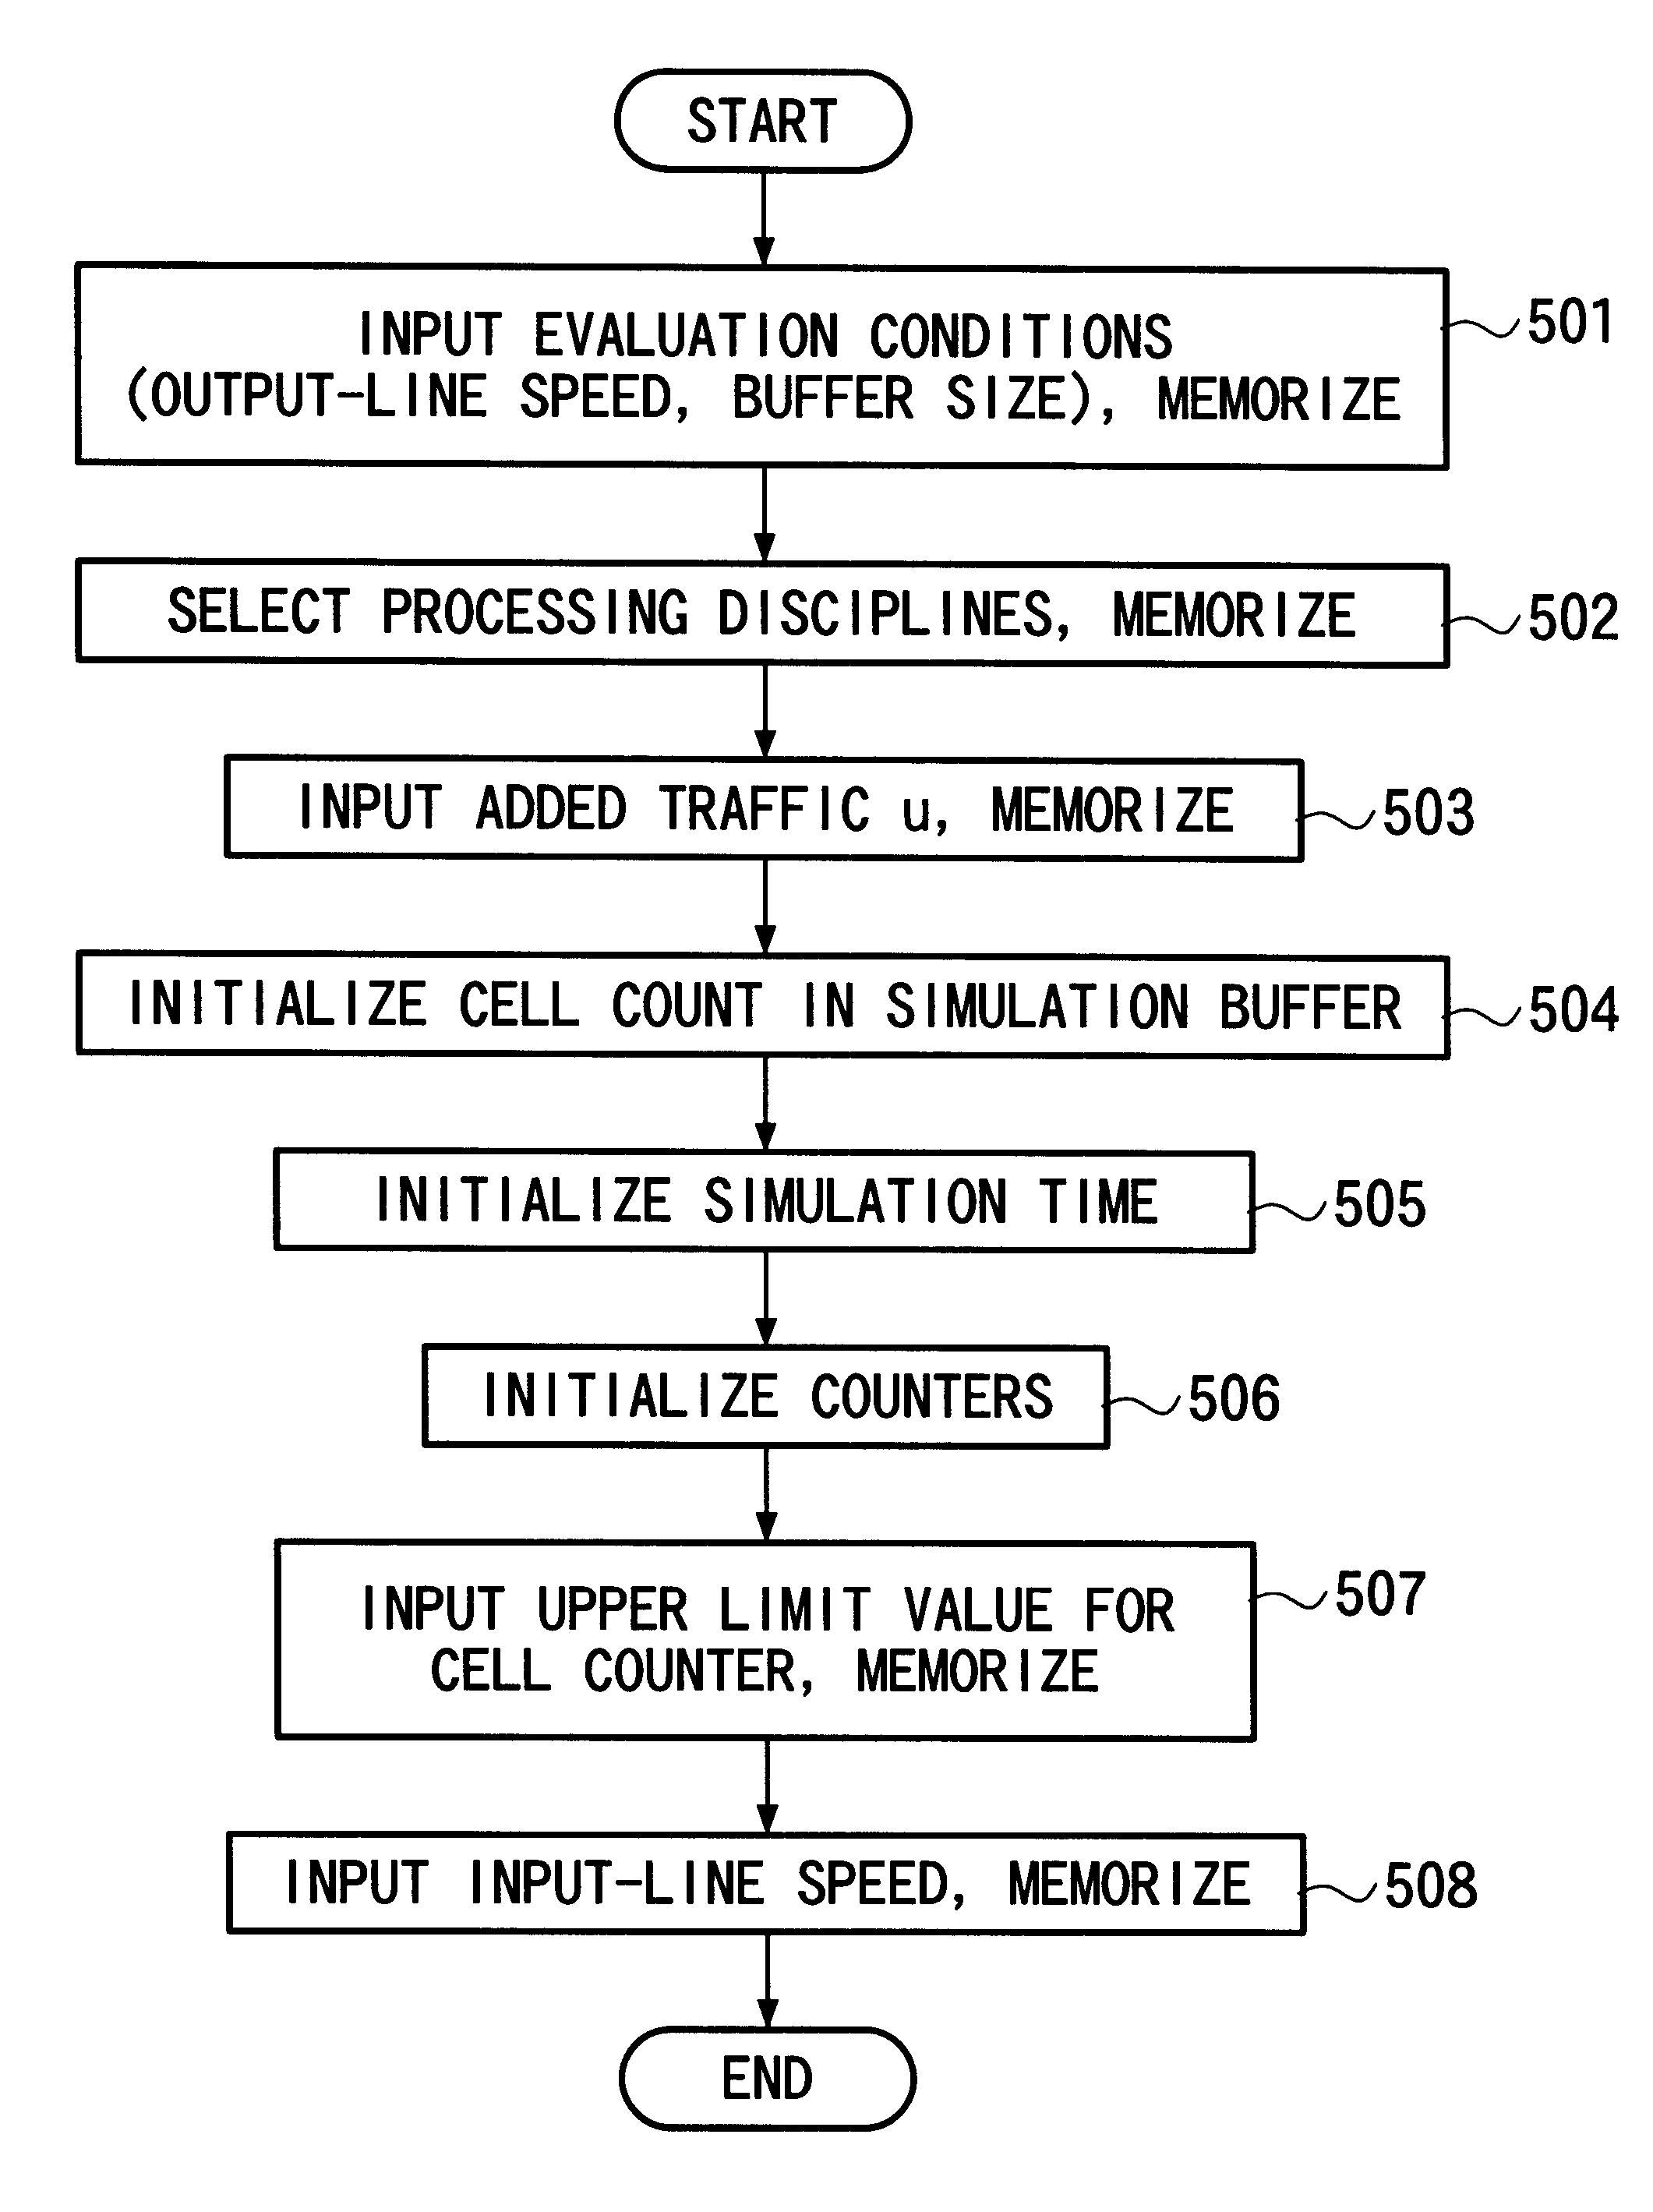 Apparatus for quality of service evaluation and traffic measurement